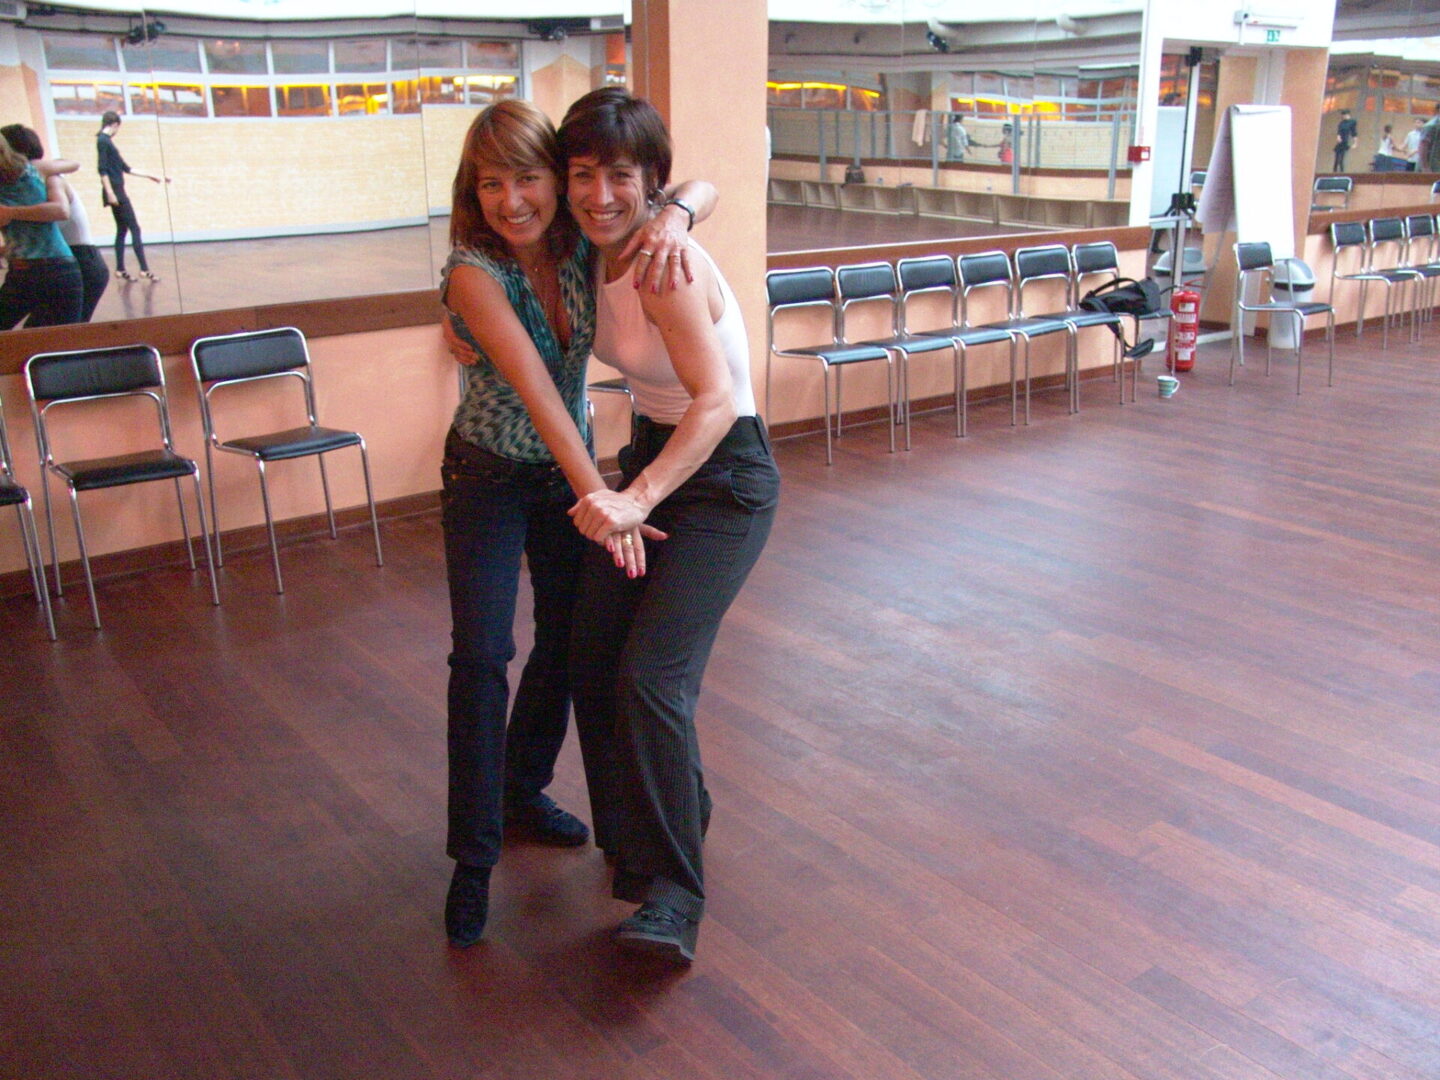 Two women pose for a picture in the dance floor.